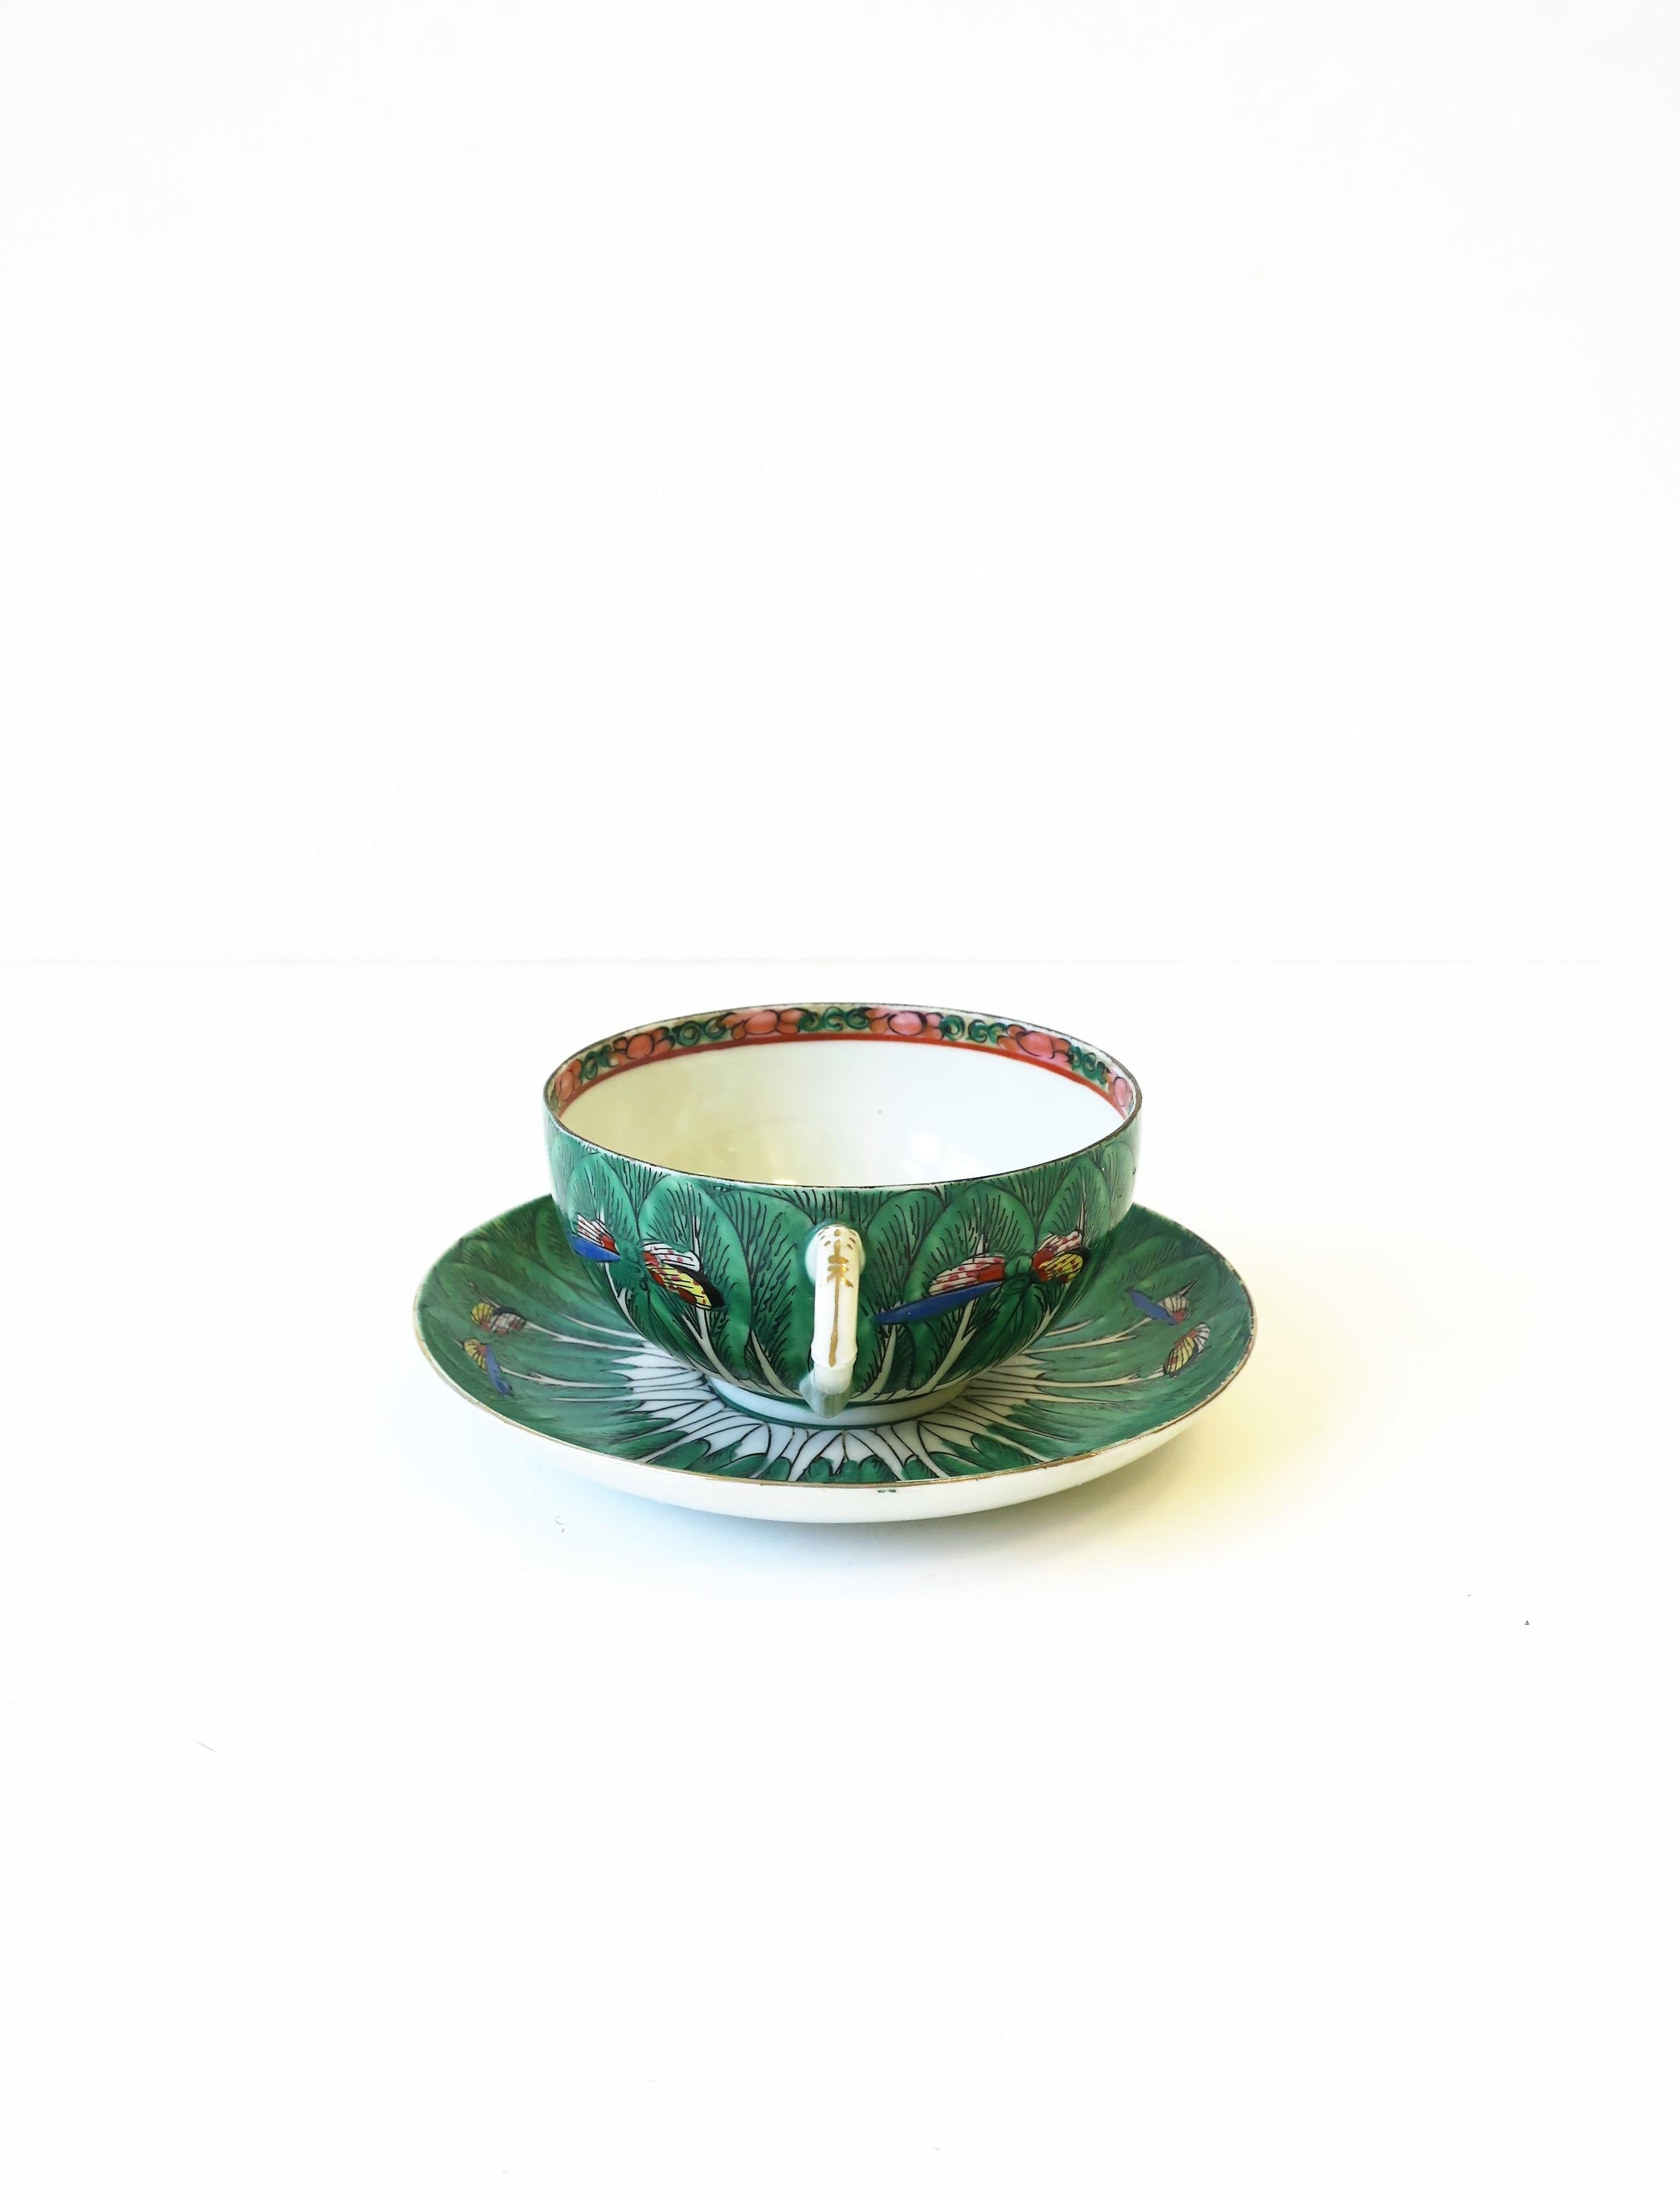 Famille Verte Porcelain Cabbage Leaf & Butterfly Coffee or Tea Cup and Saucer 3